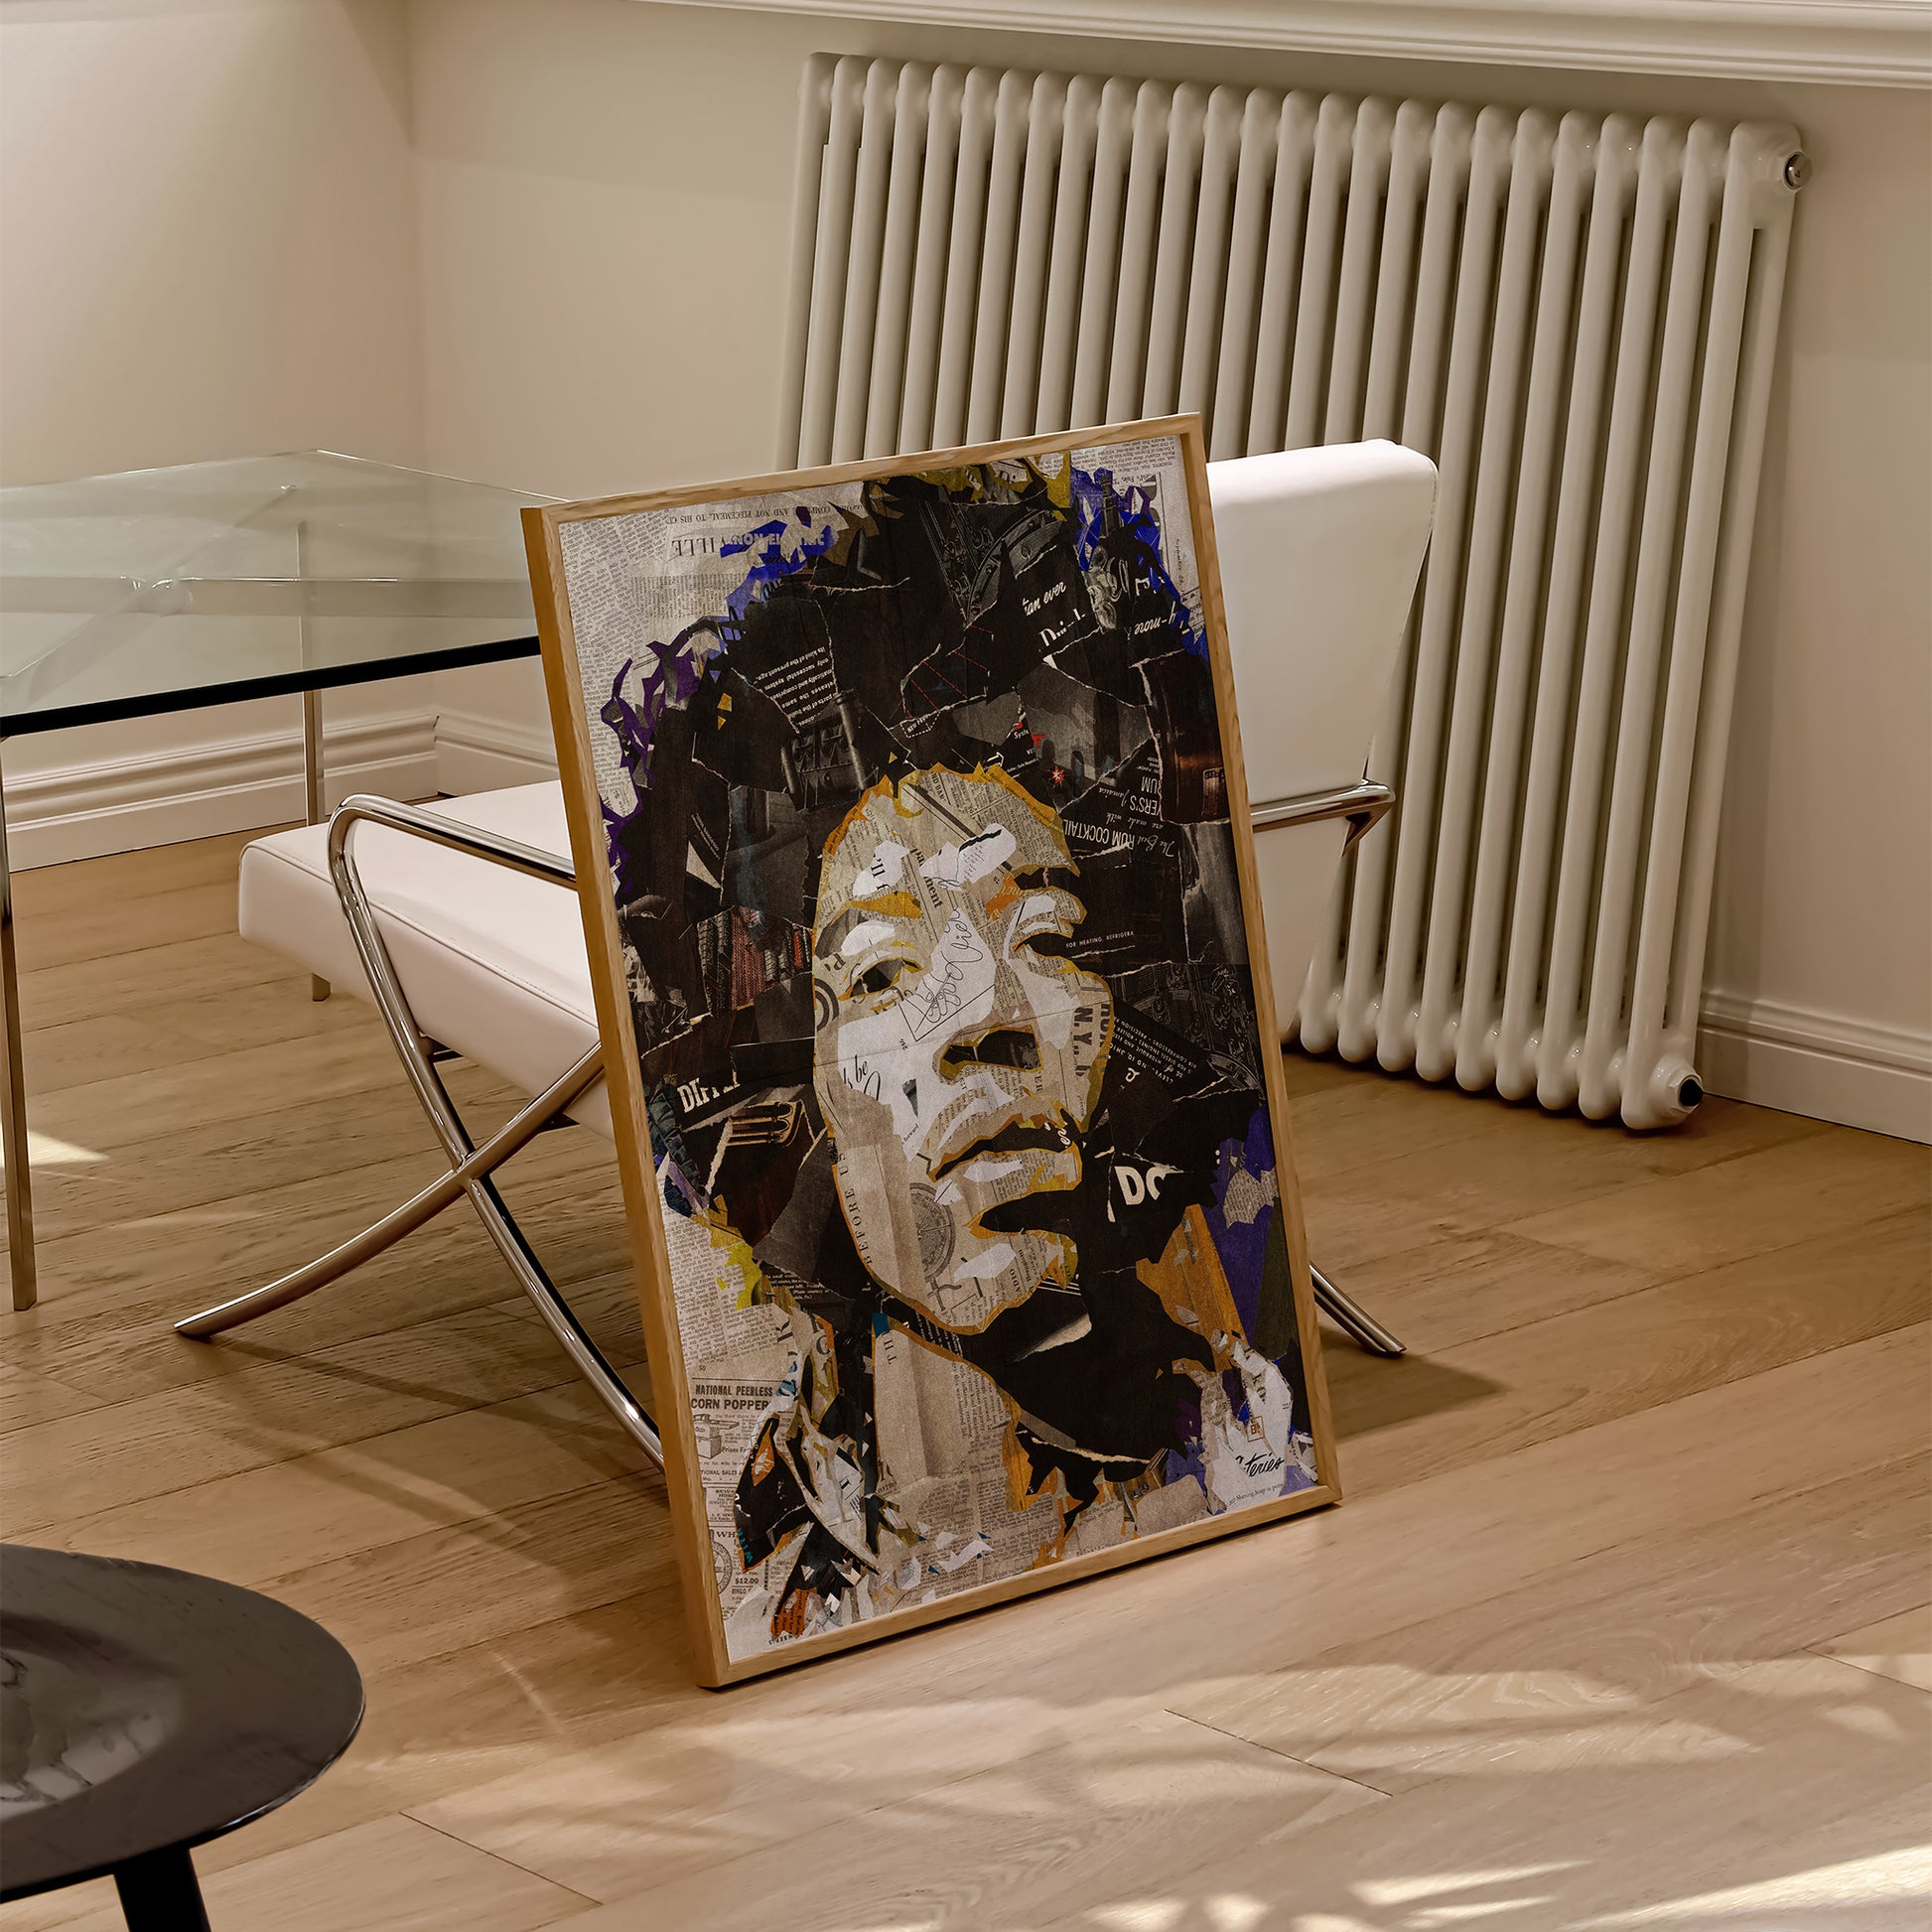 Be inspired by our iconic collage portrait art print of Jimi Hendrix. This artwork was printed using the giclée process on archival acid-free paper and is presented in a natural oak frame, capturing its timeless beauty in every detail.